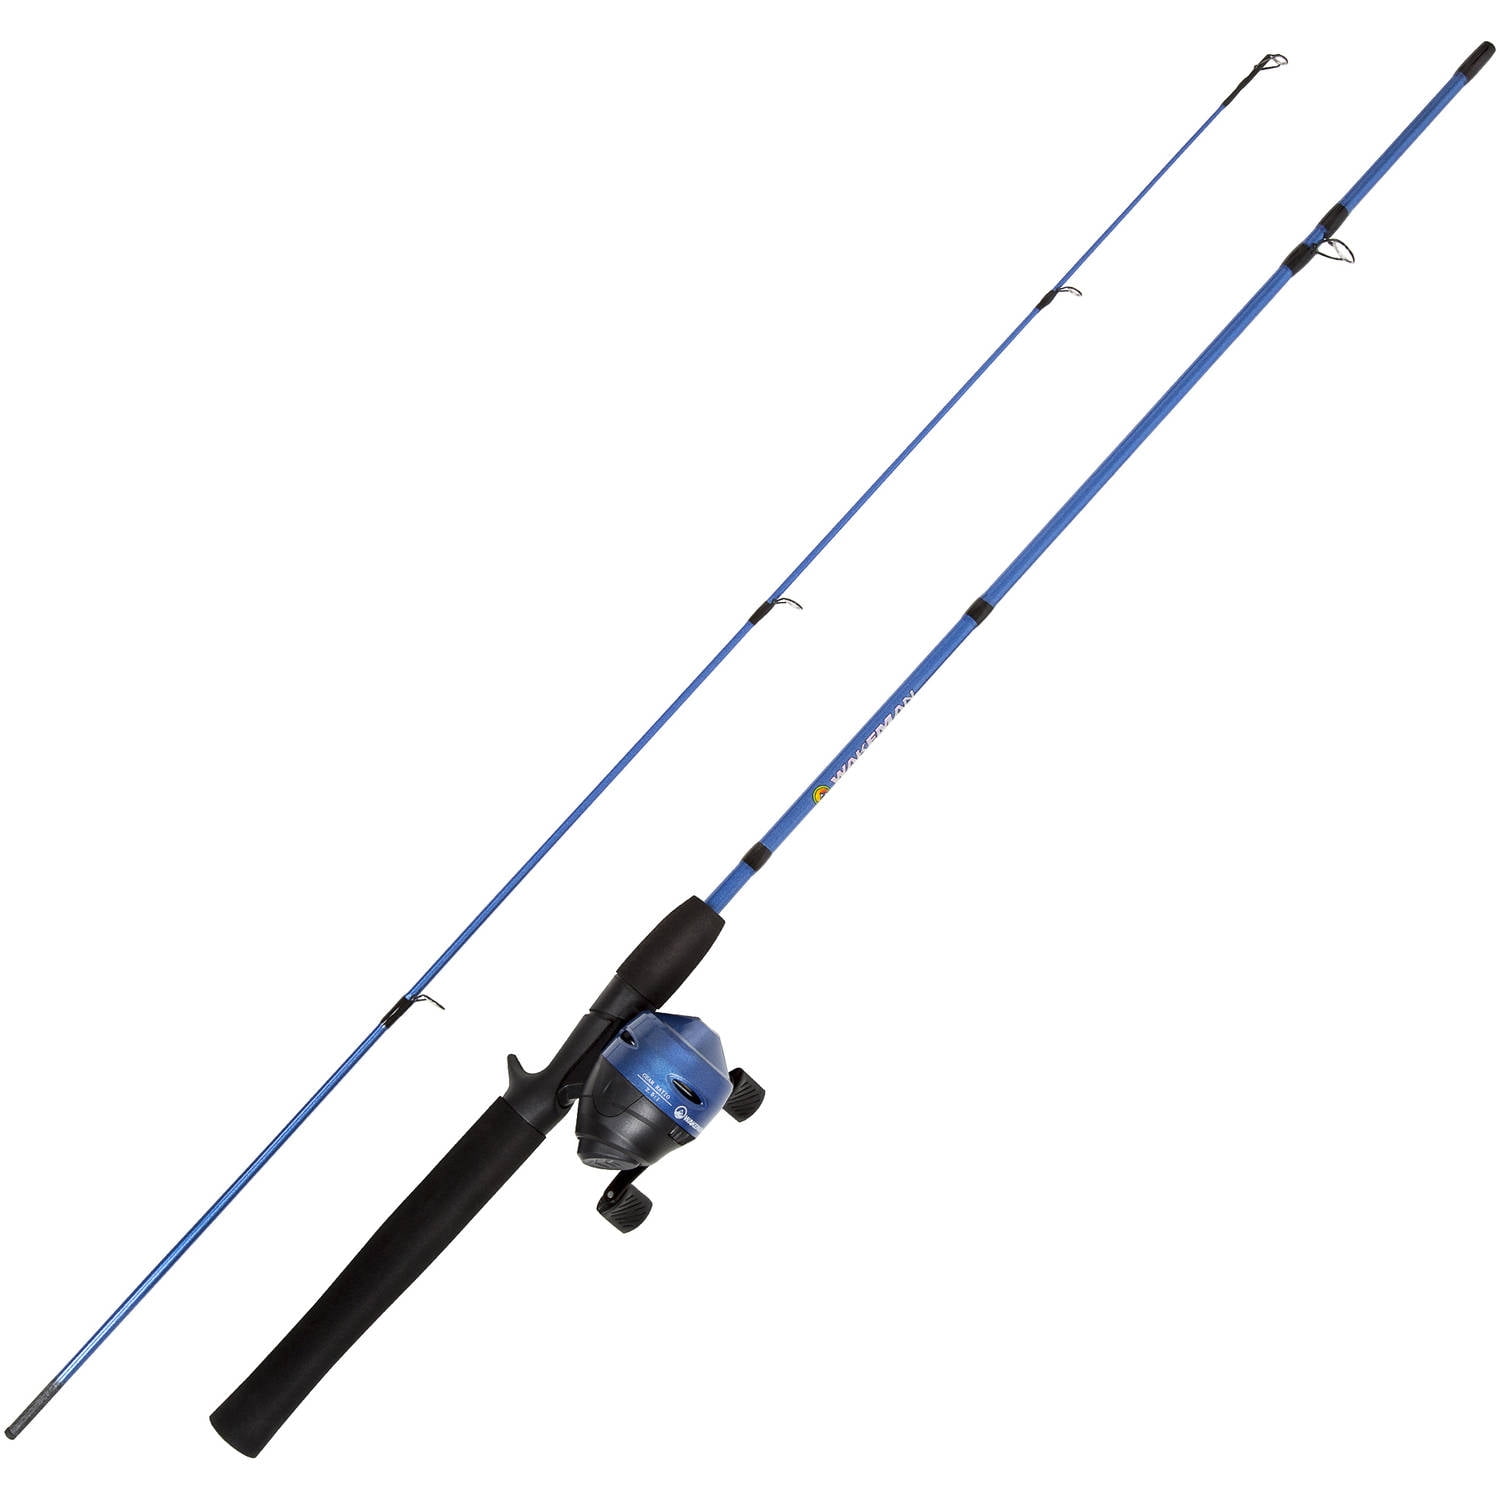 Green Metallic 20 for sale online Wakeman Swarm Series Spinning Rod and Reel Combo 